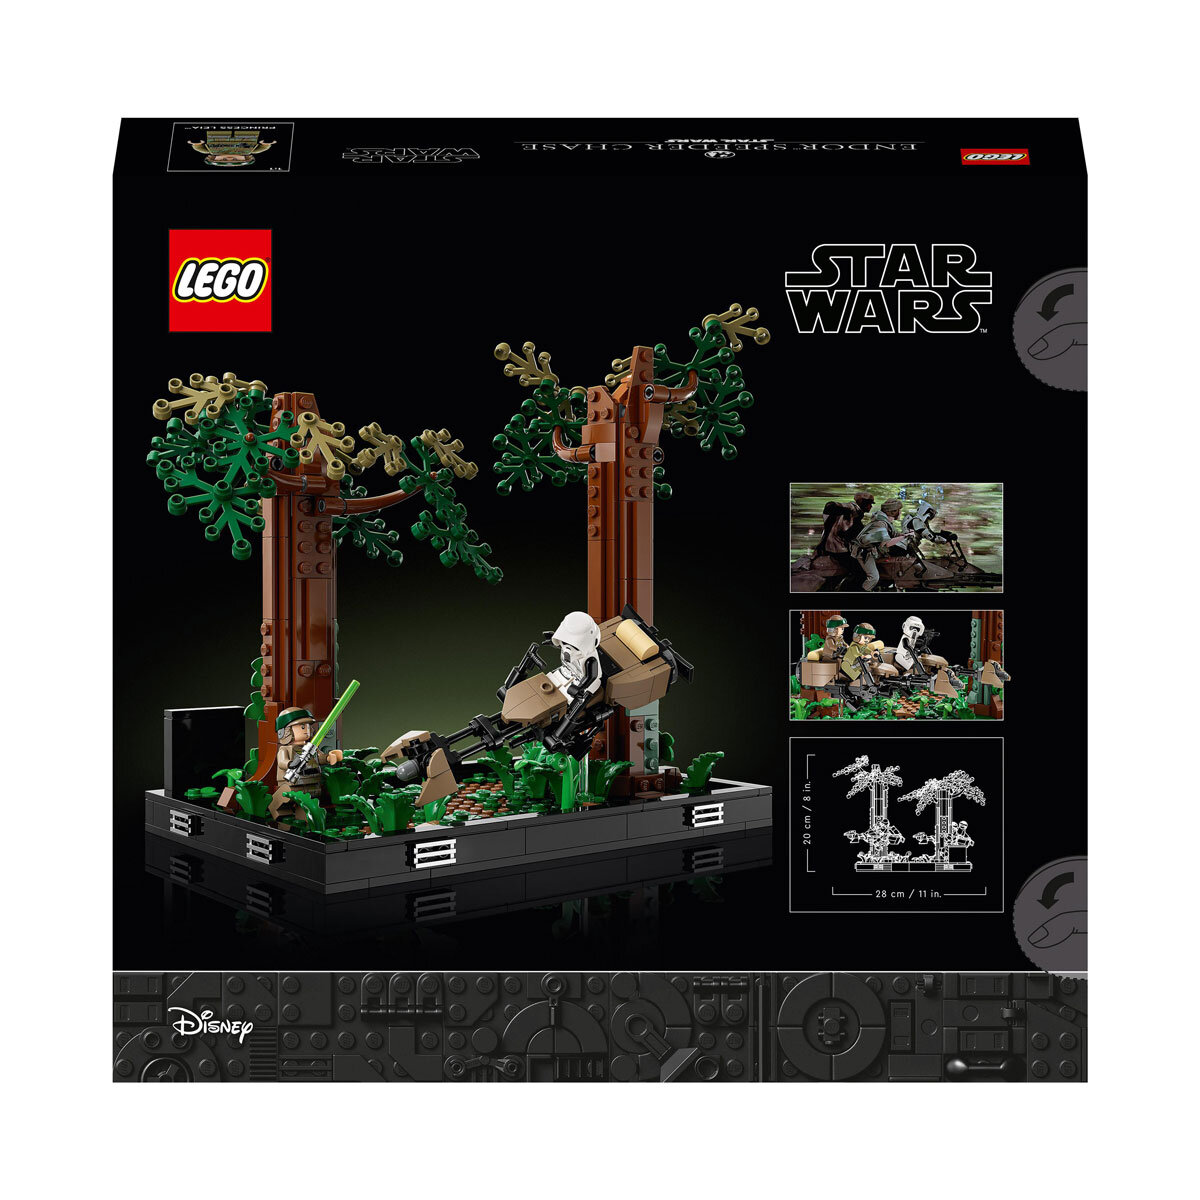 Buy LEGO Star Wars Endor Speeder Chase Diorama Back of Box Image at Costco.co.uk